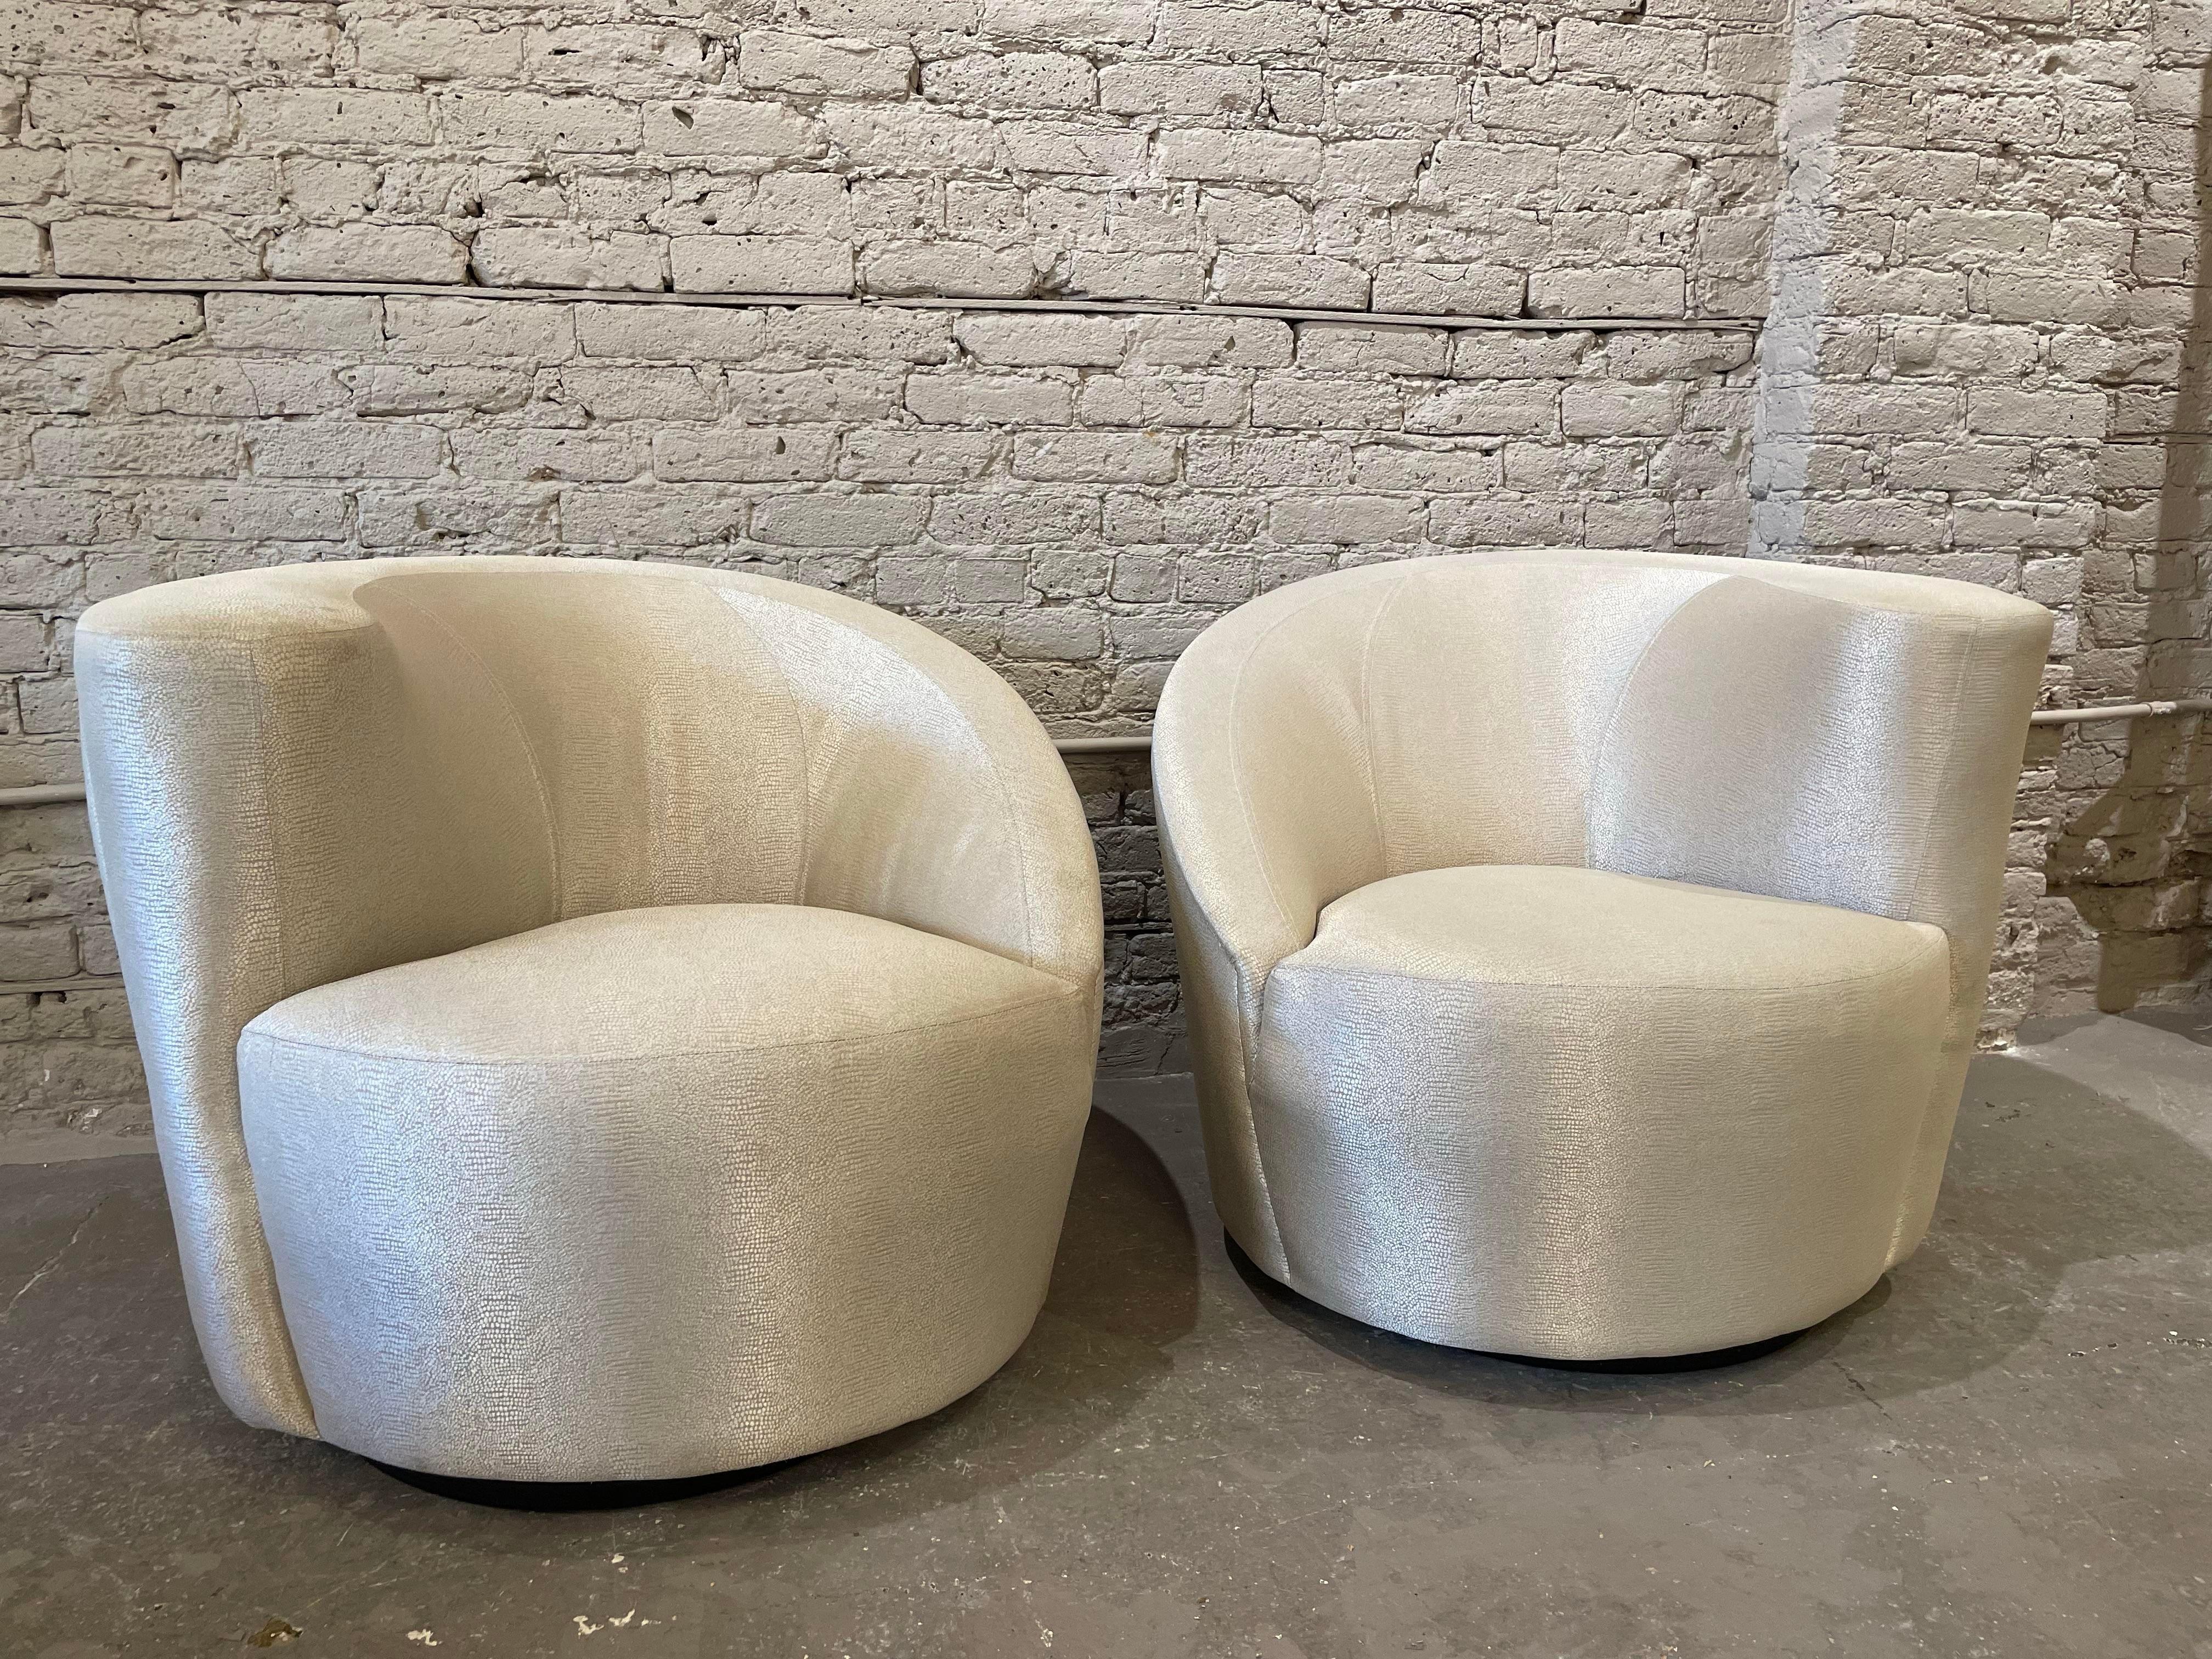 This pair of Nautilus chairs exemplify the stunning organic Futurist forms and clean lines for which Vladimir Kagan one of the most esteemed furniture designers of the 20th century is celebrated. The chairs' form suggests an abstracted